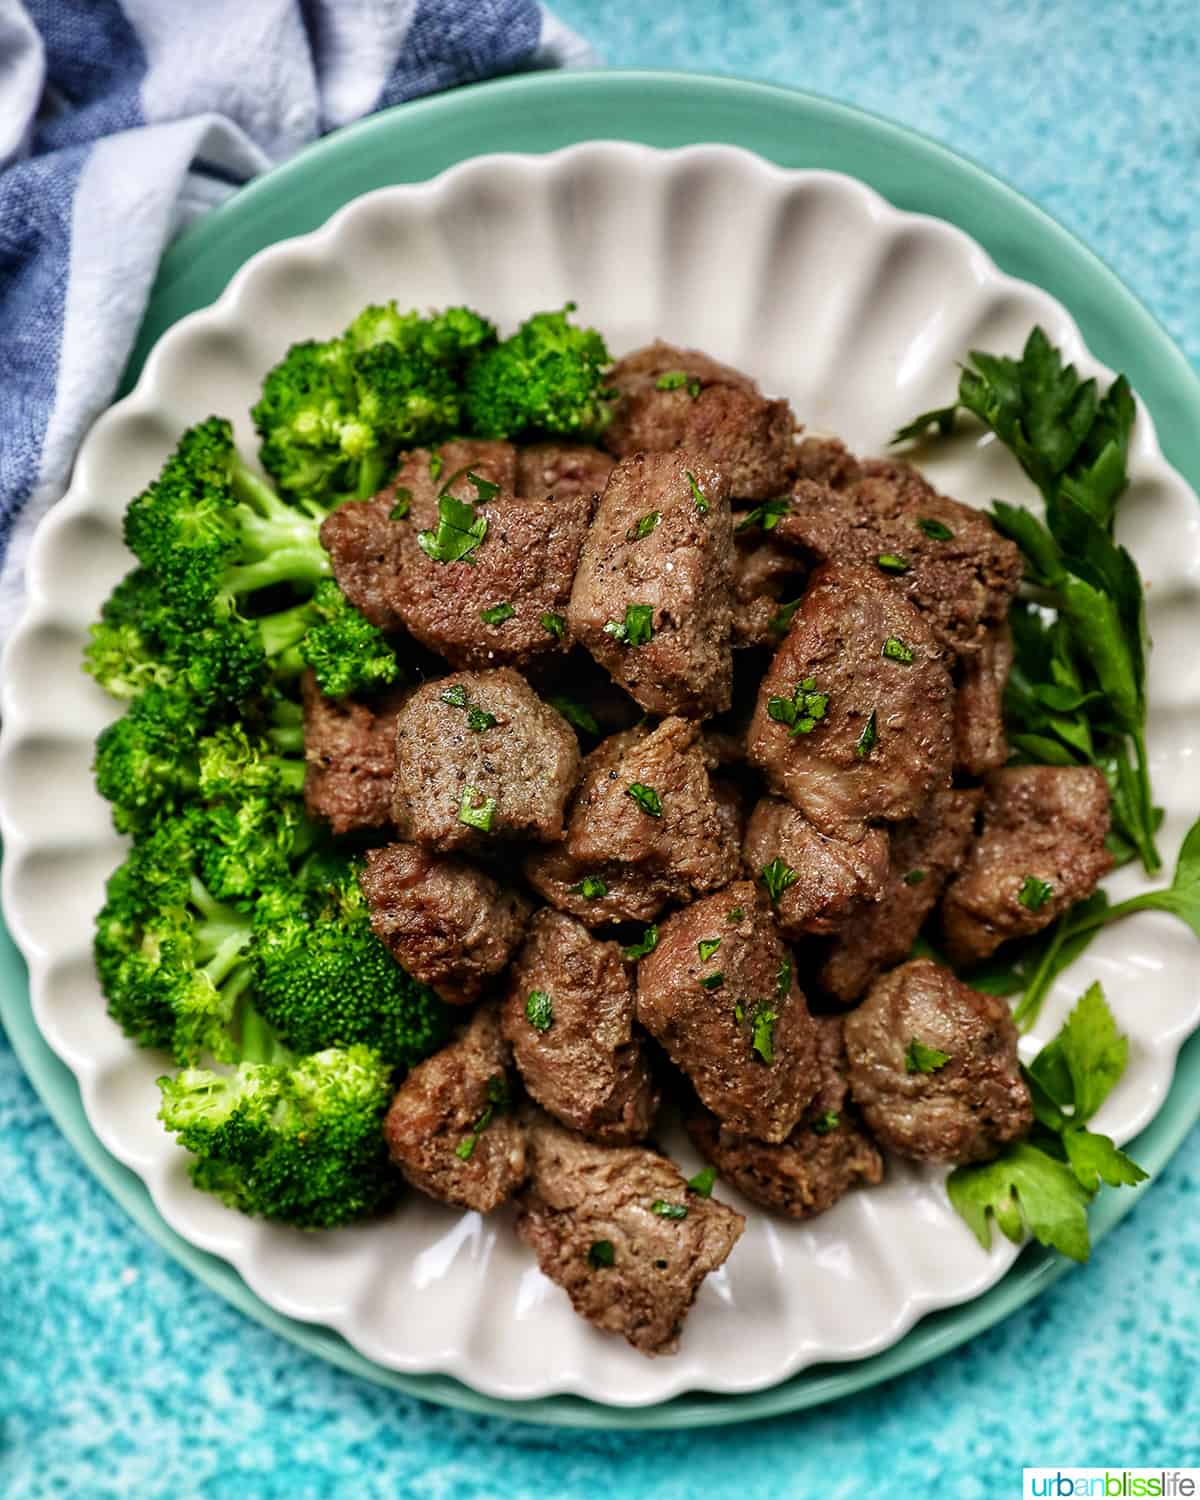 air fryer steak bites with chopped parsley garnish and a side of broccoli on a plate.